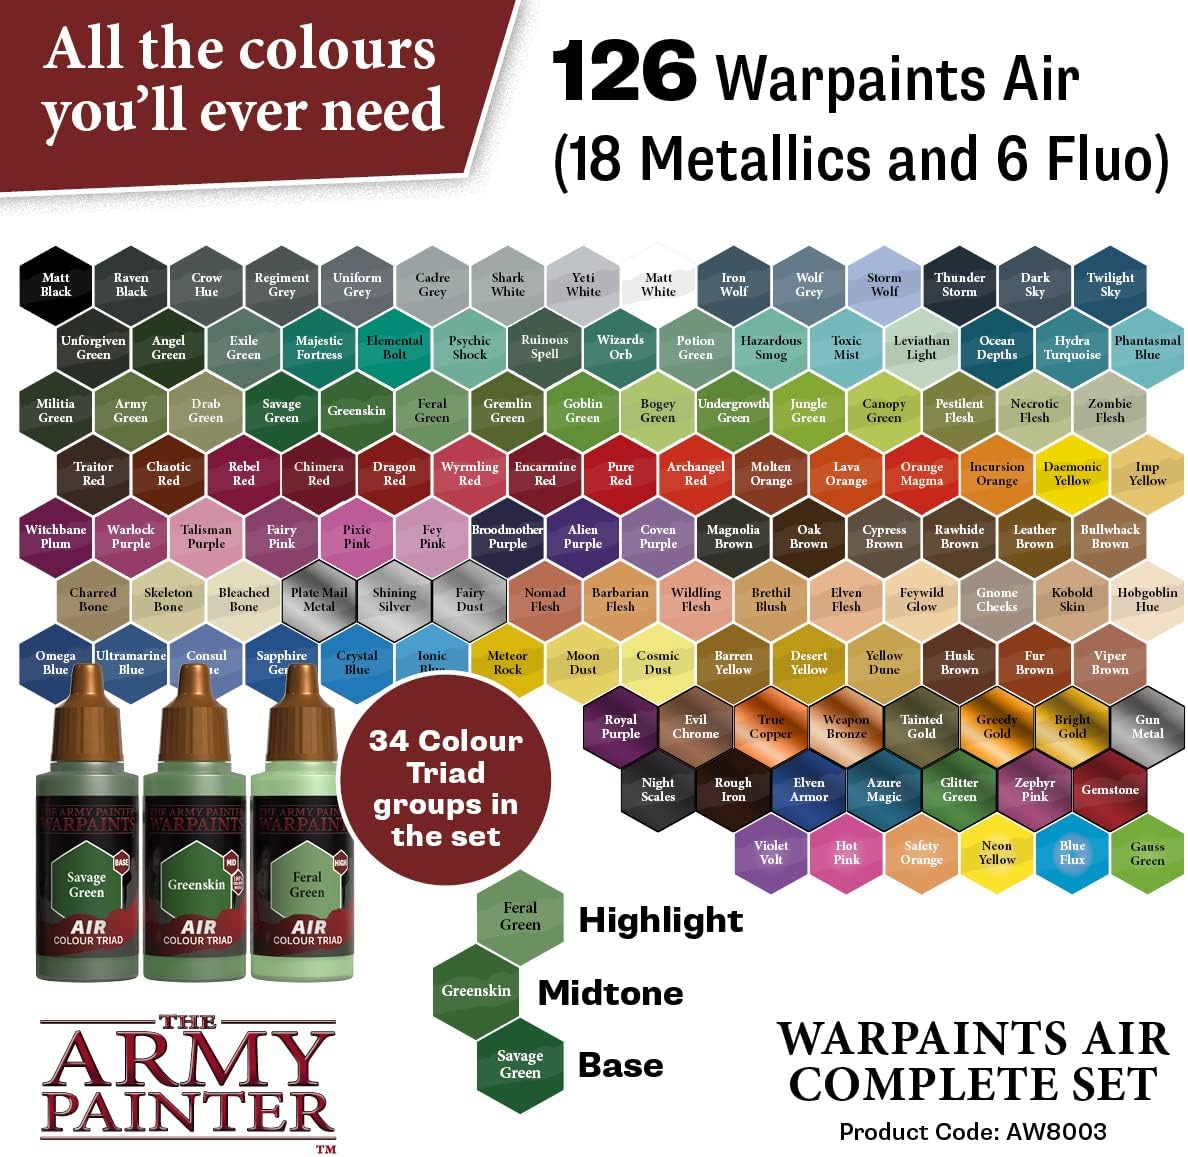 The Army Painter Warpaints Air Complete Set - 126 Non-Toxic Water Based Airbrush Paint Set – Miniature Paint for Tabletop Roleplaying, Boardgames, and Wargames Miniature Model Painting